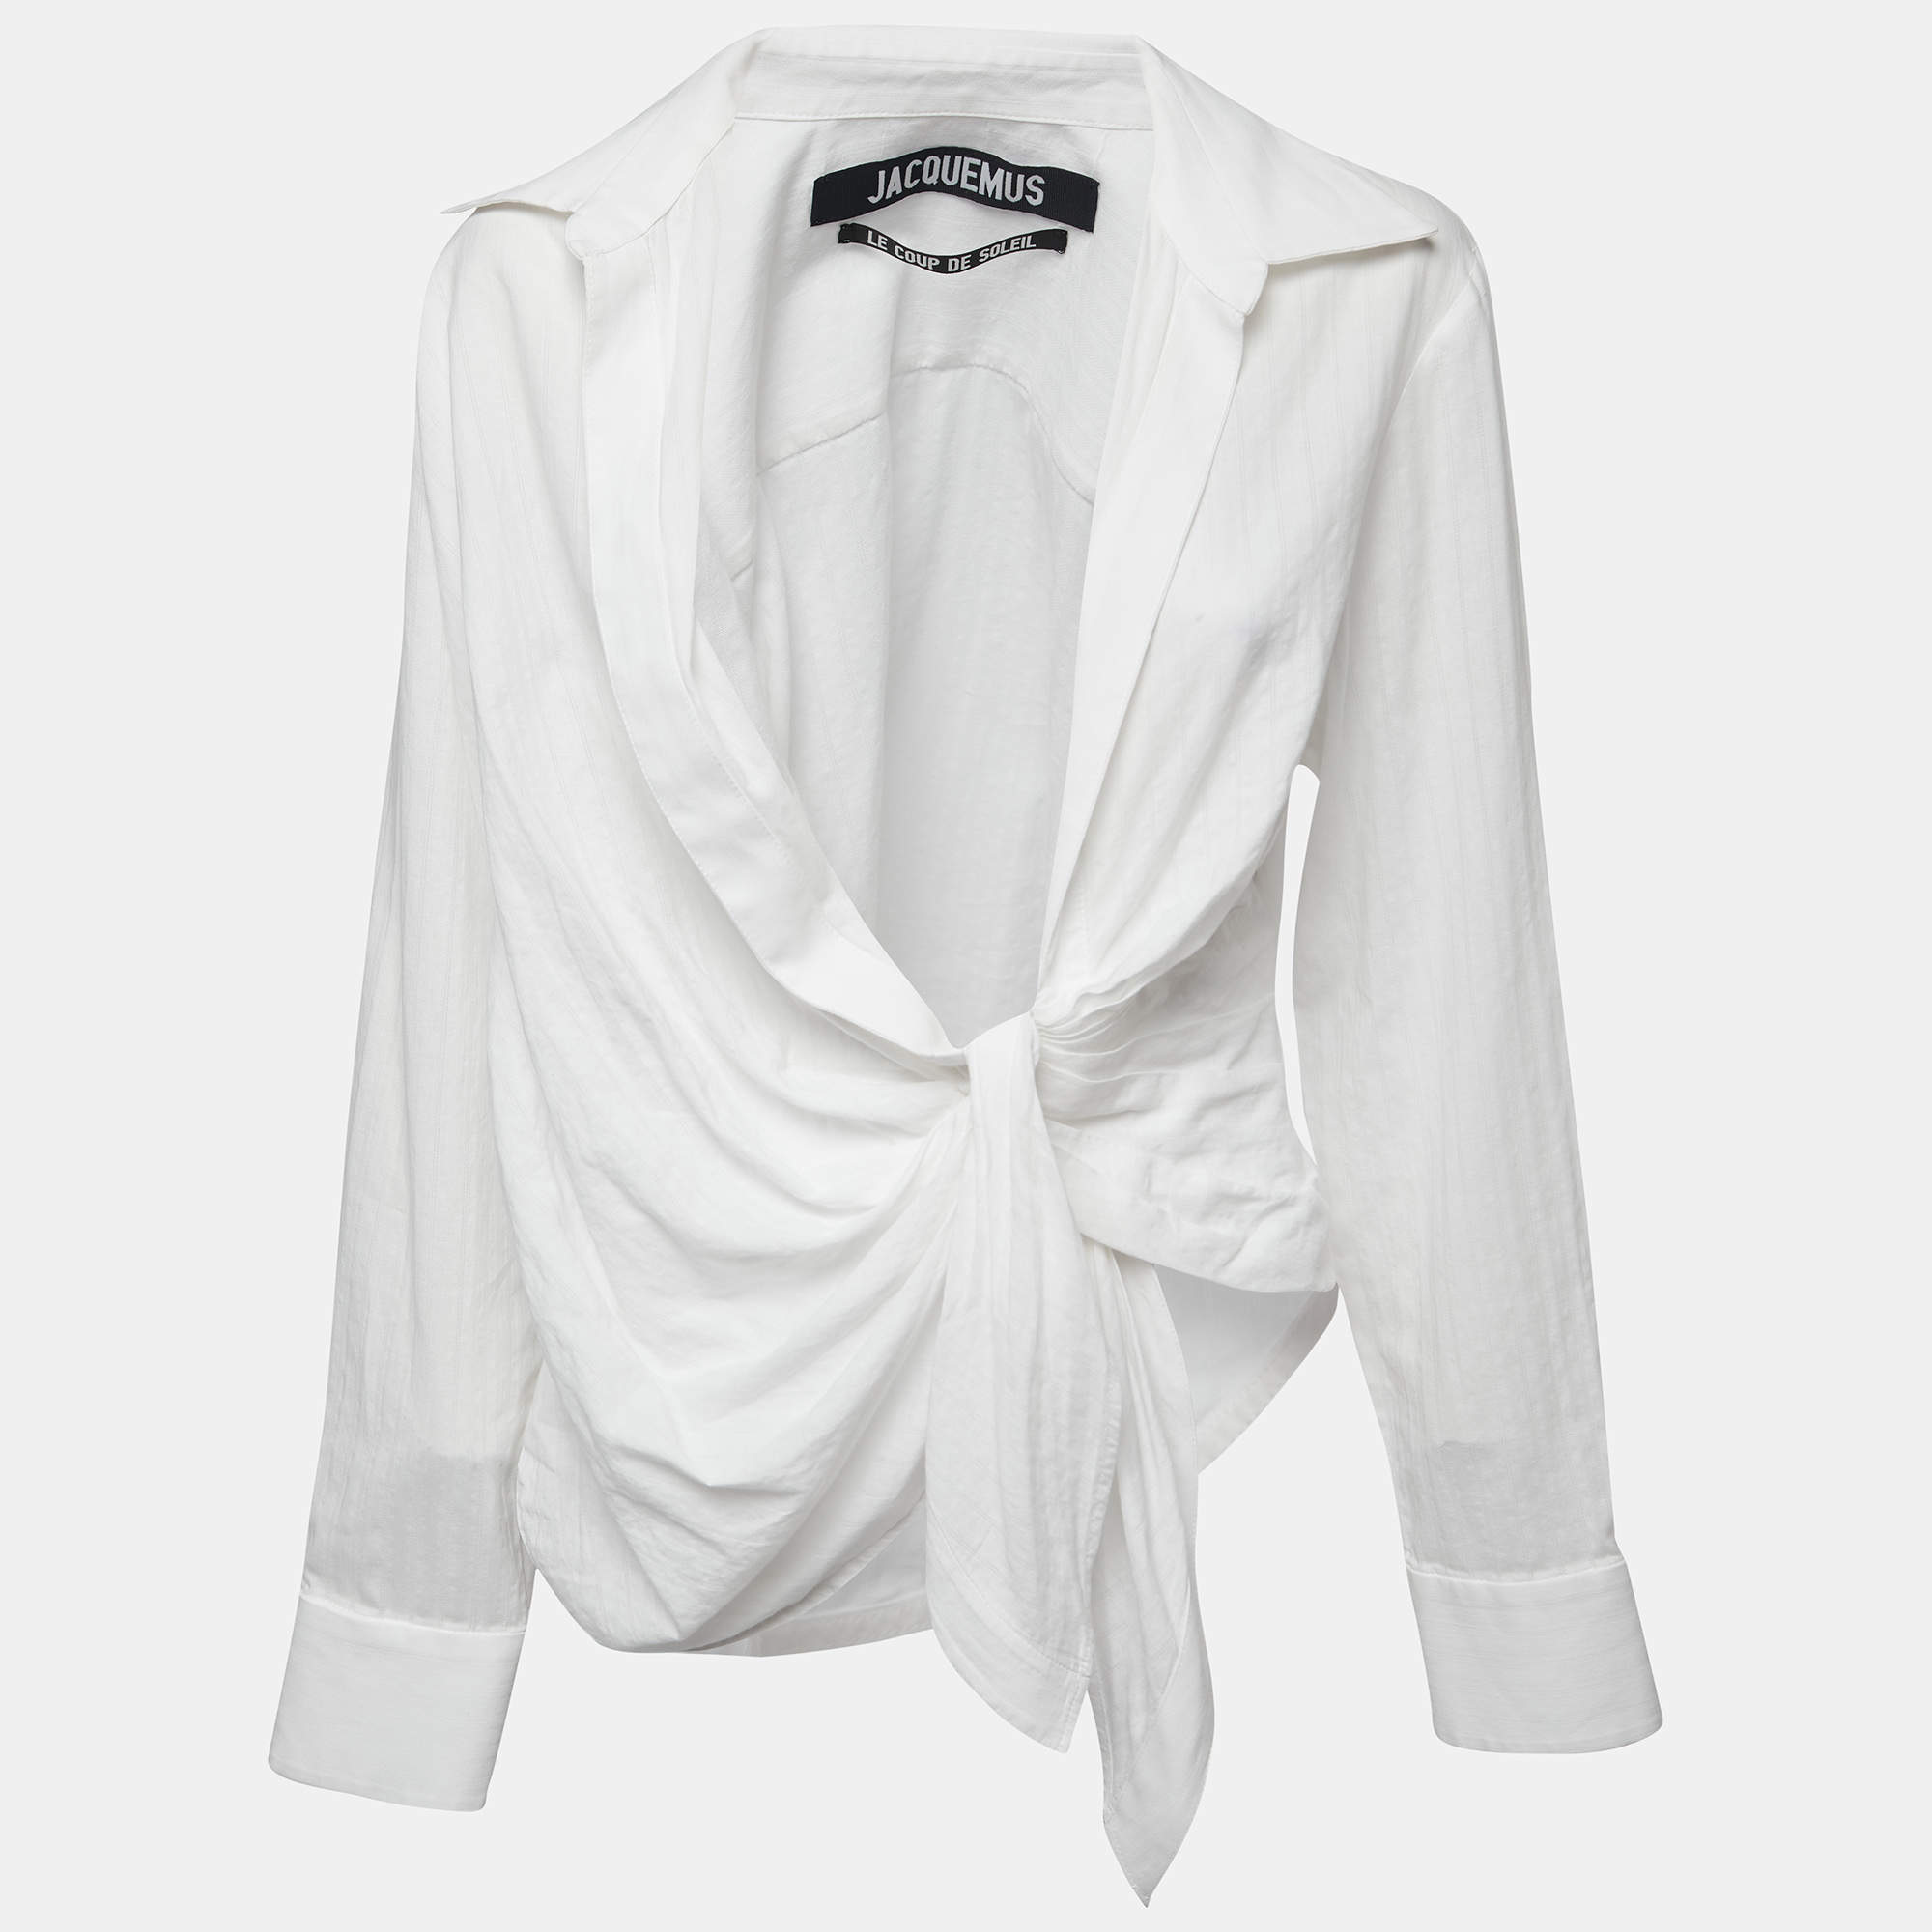 Jacquemus White Cotton Tie Detailed Full Sleeve Cropped Shirt S